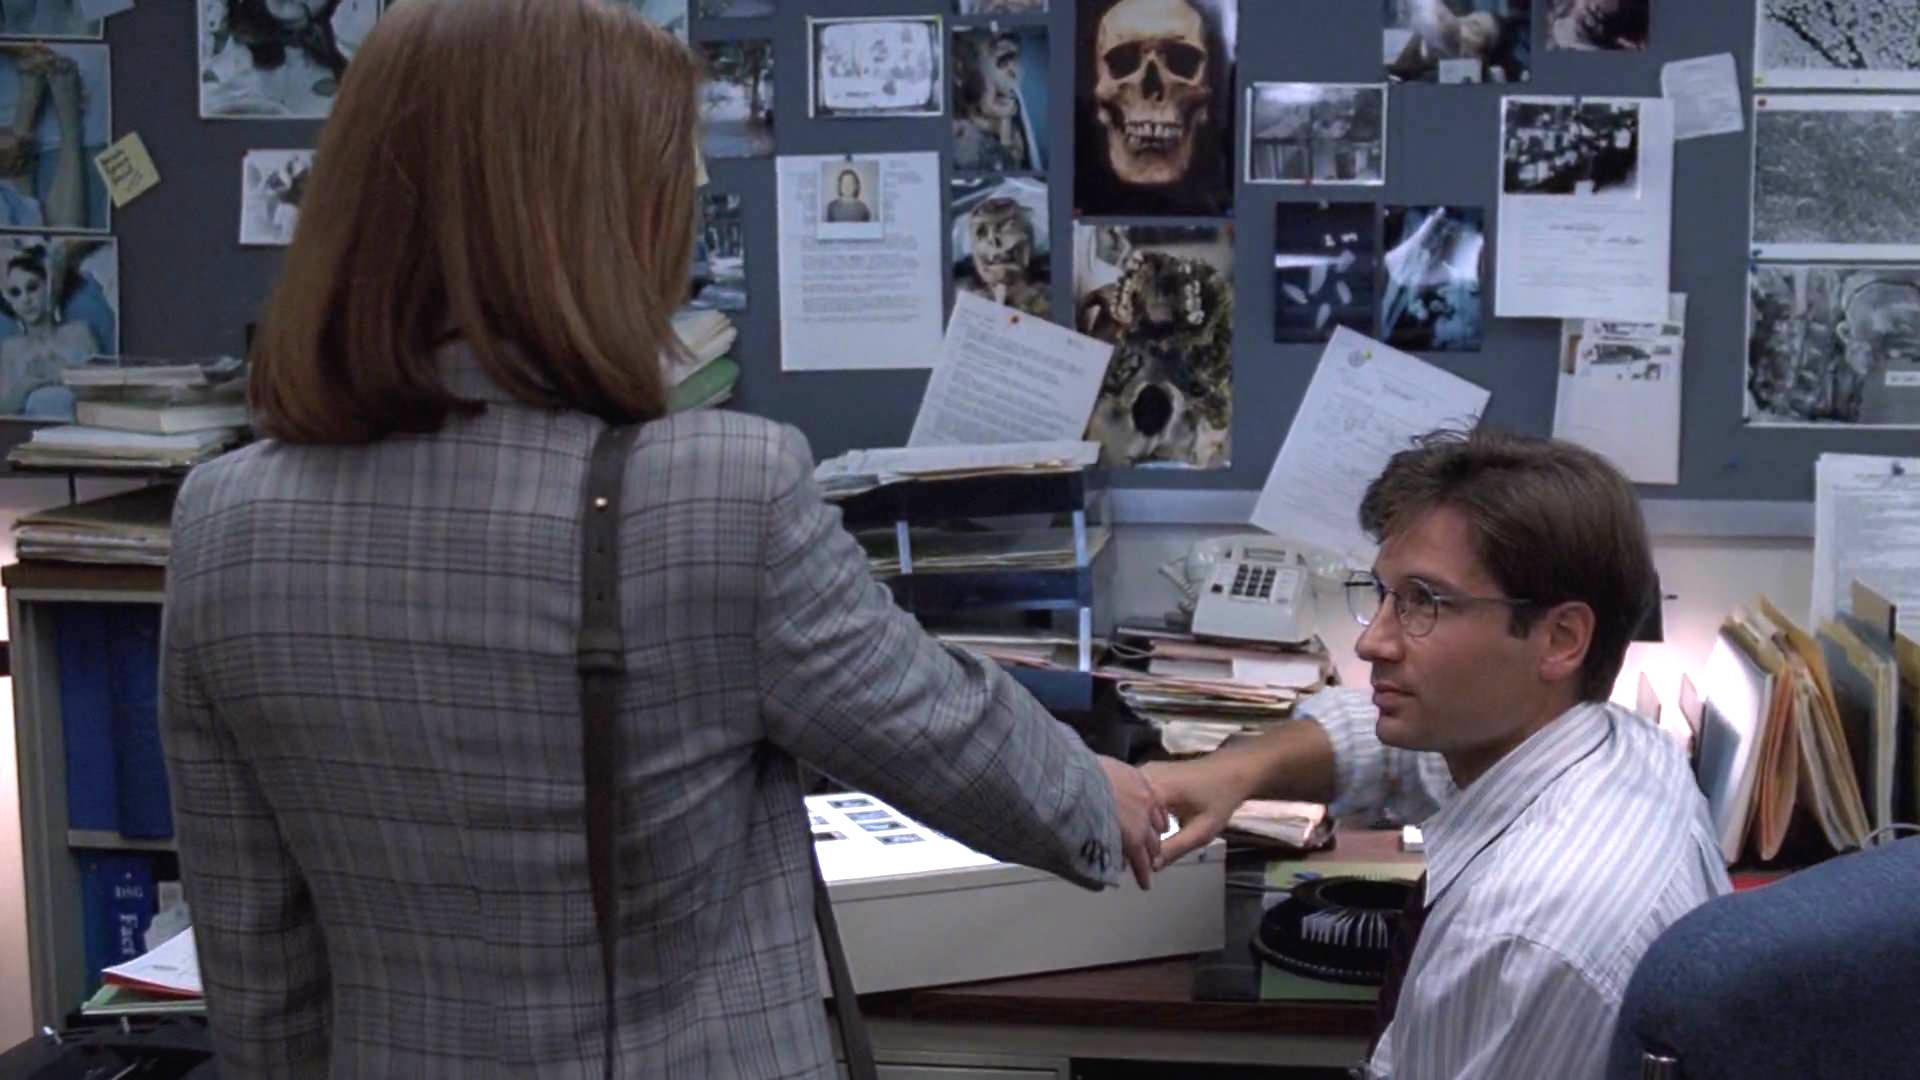 Dana Scully (Gillian Anderson) introduces herself to Fox Mulder (David Duchovny) in The X-Files ‘Pilot’ episode (S1, Ep1). Chris Carter, the creator of The X-Files, fought back against any romantic relationship developing between Mulder and Scully. | 20th Century Fox, 1994.